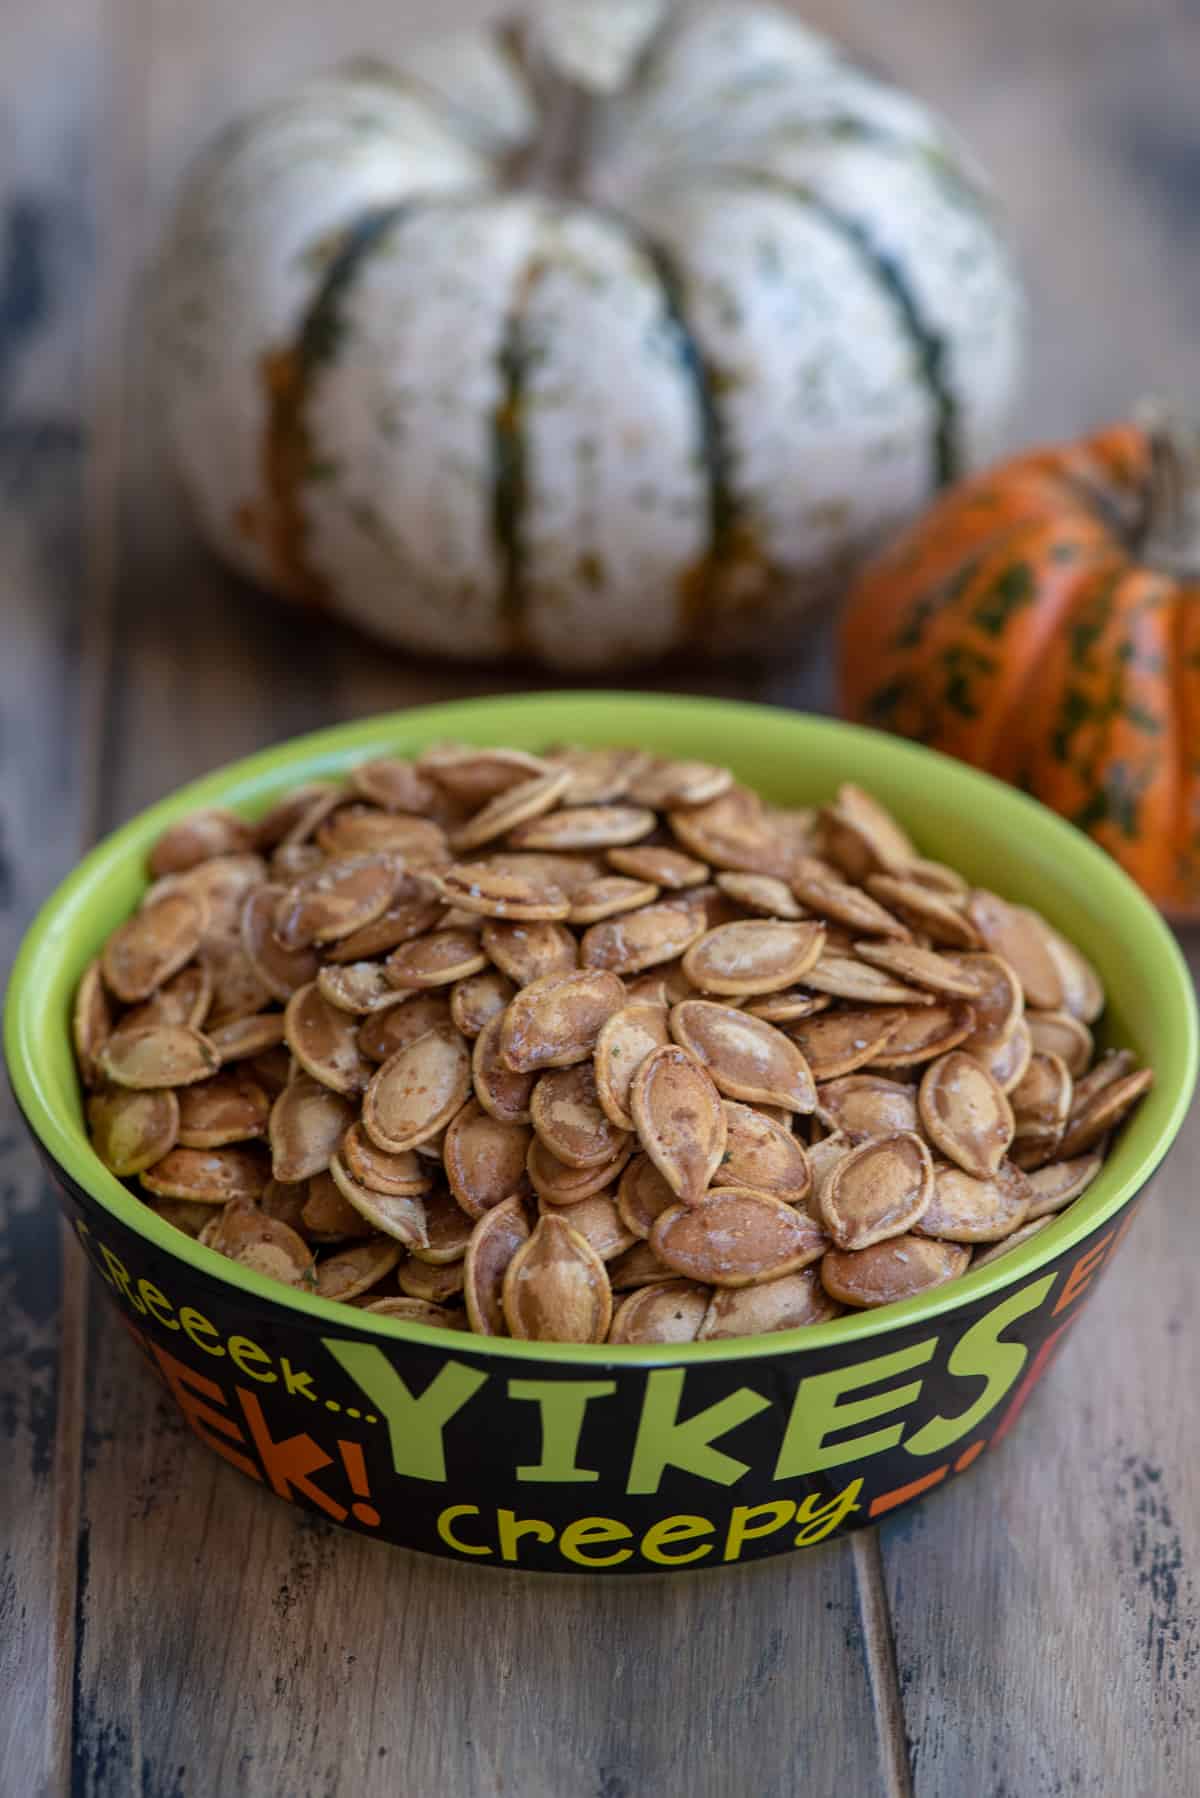 Roasted pumpkin seeds in a green bowl with pumpkins in the background.